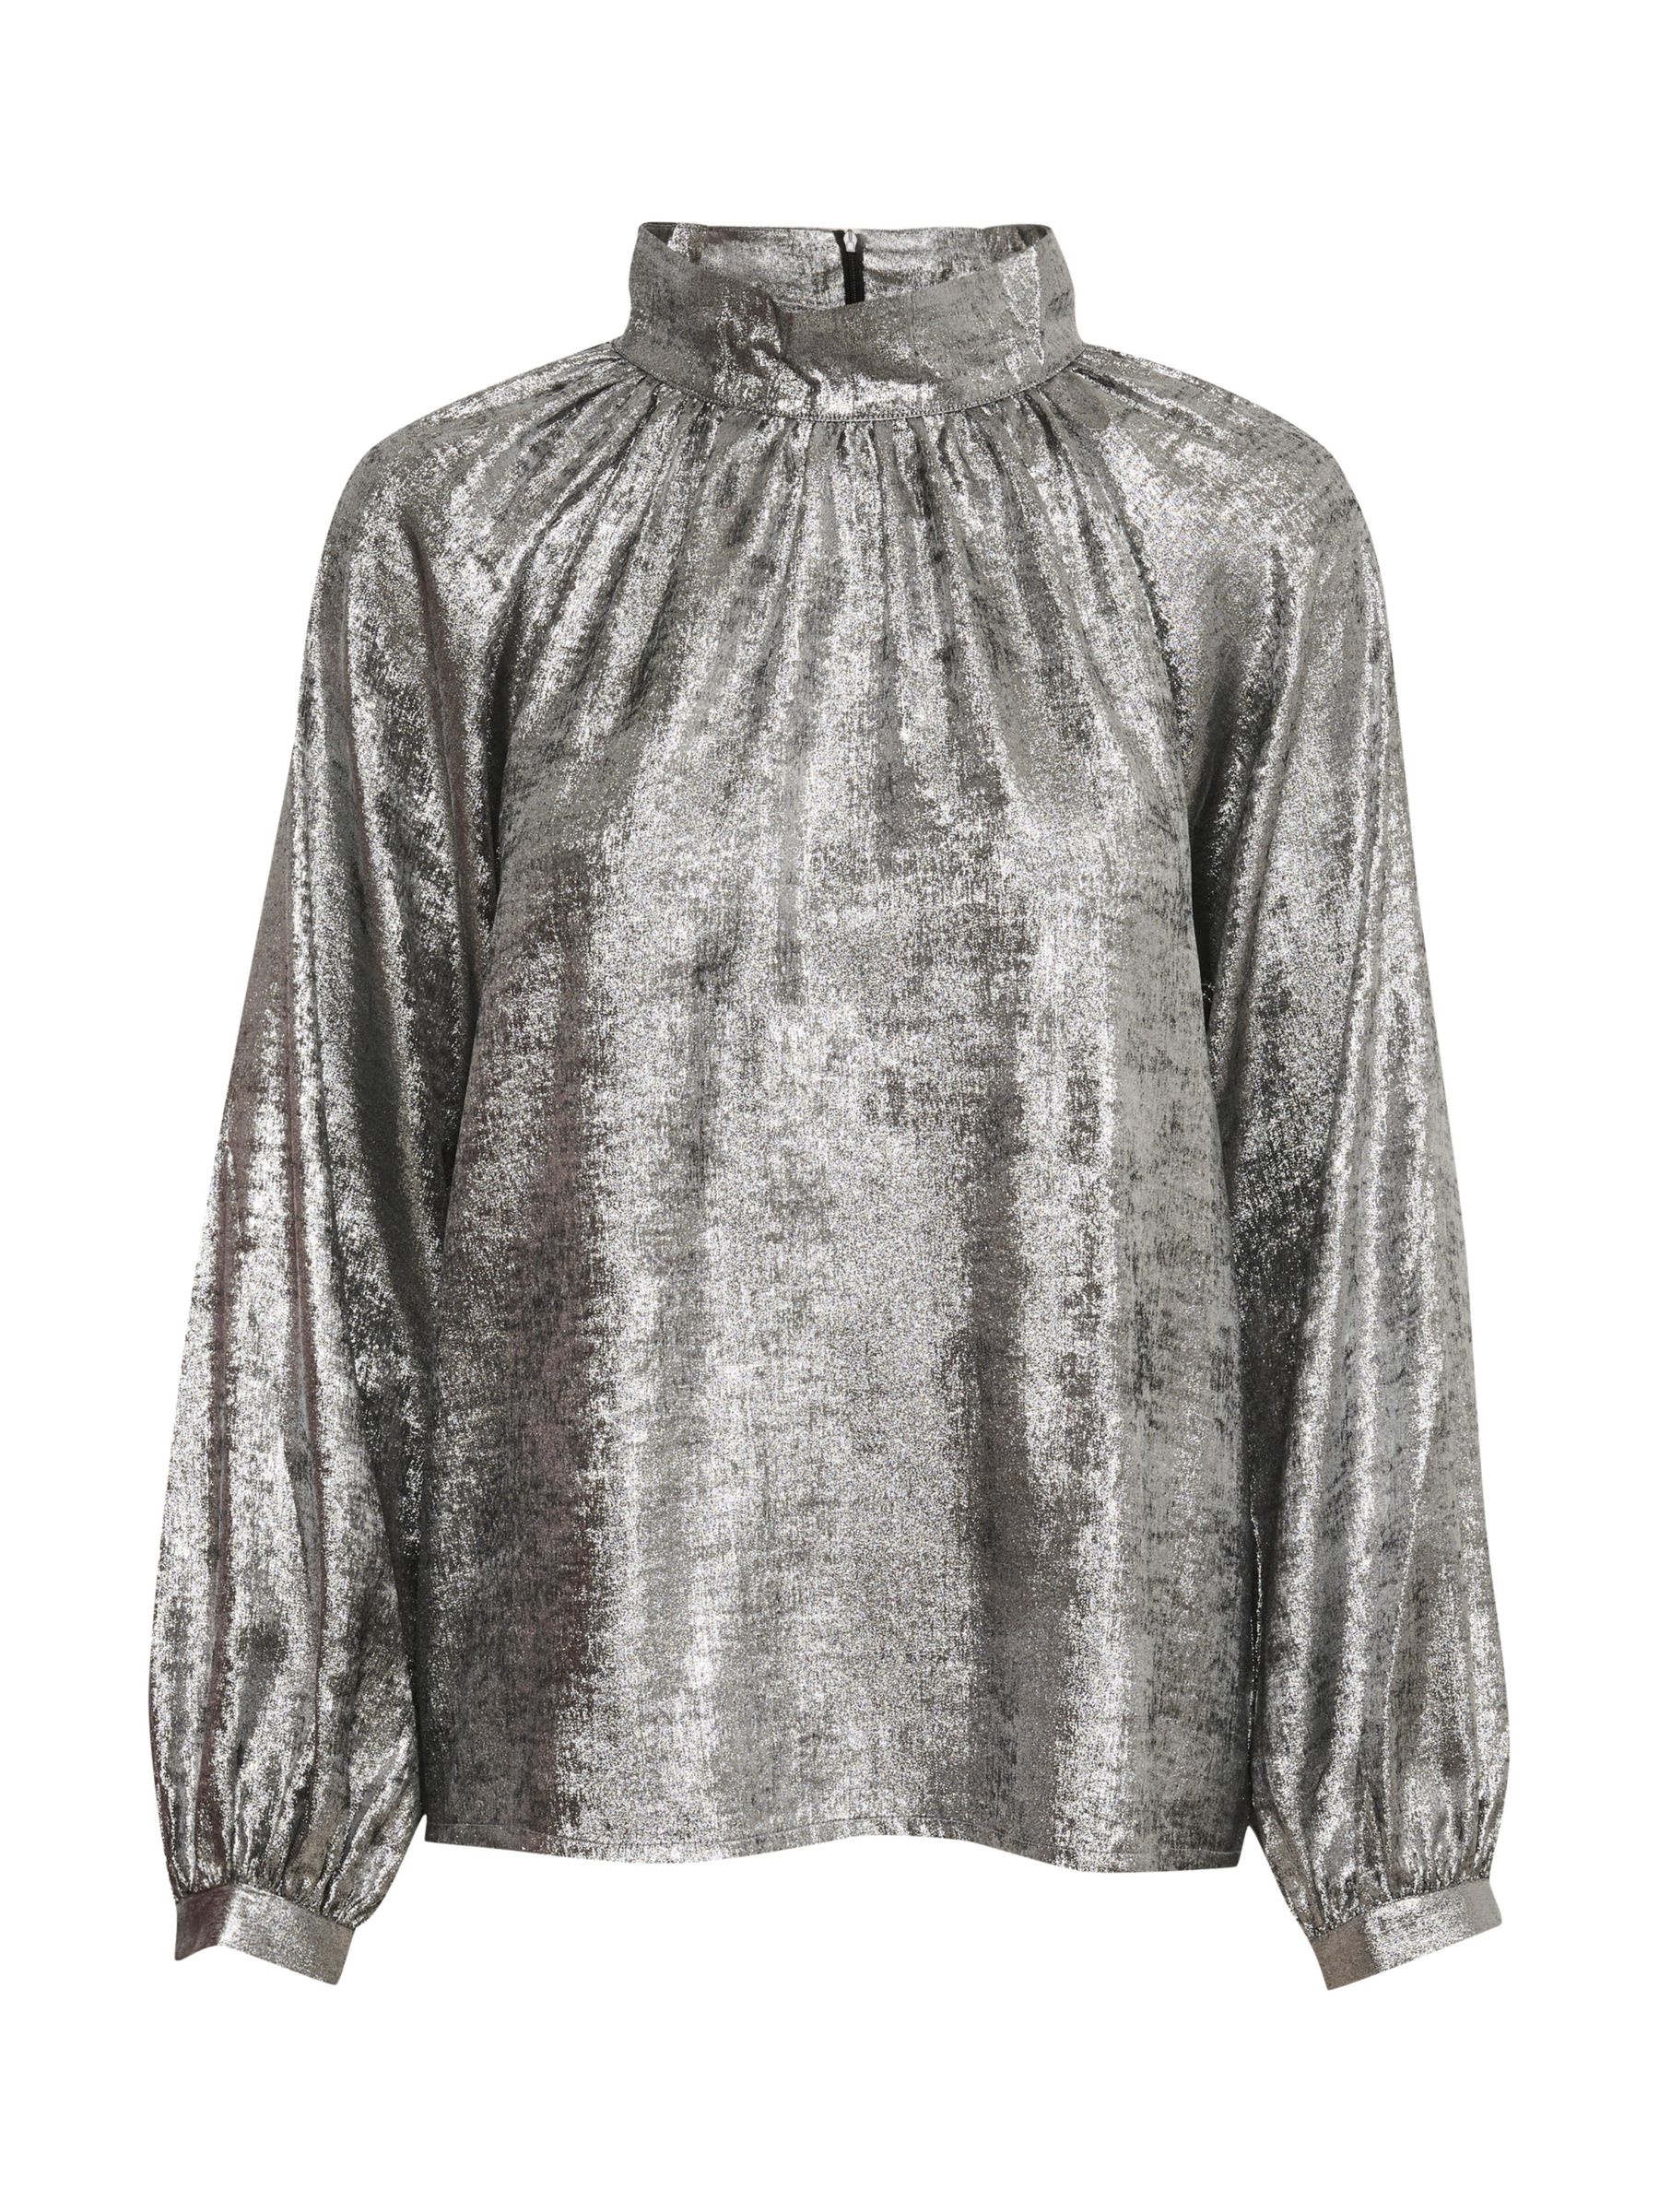 Buy Soaked In Luxury Ronya Blouse, Silver Foil Online at johnlewis.com